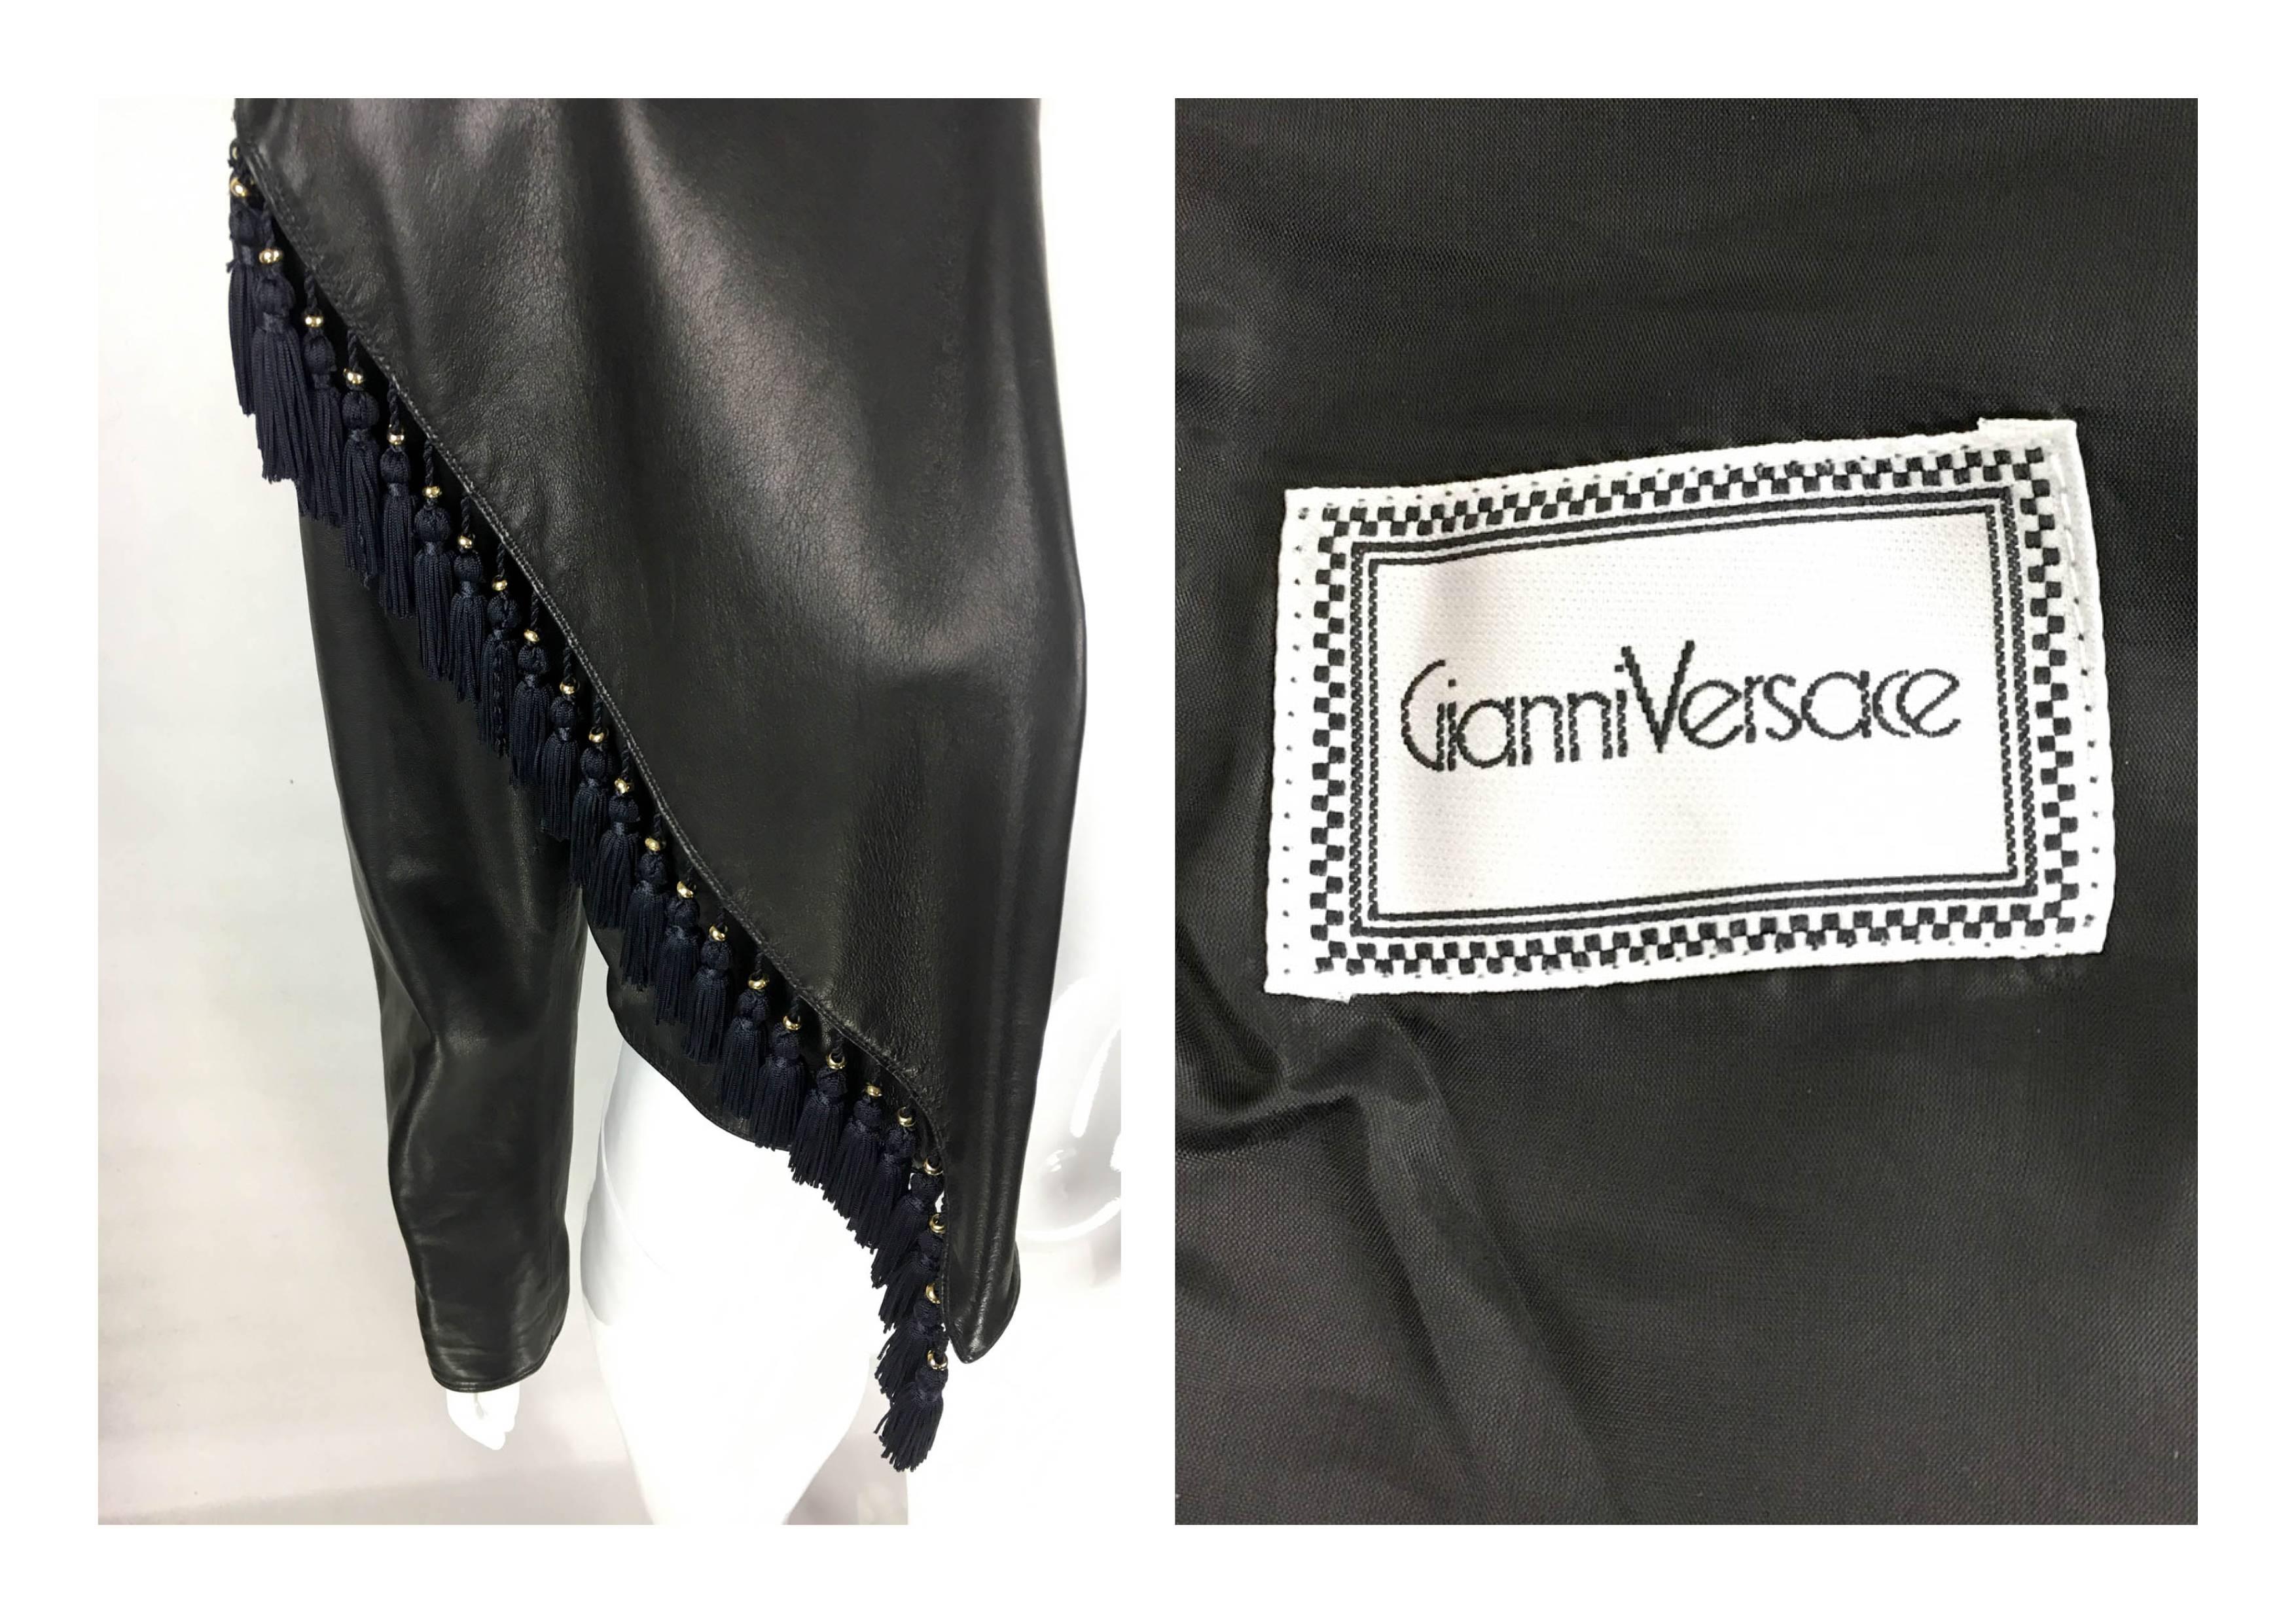 Gianni Versace Black Leather Jacket With Tassel Embellished Collar, 1980s 5